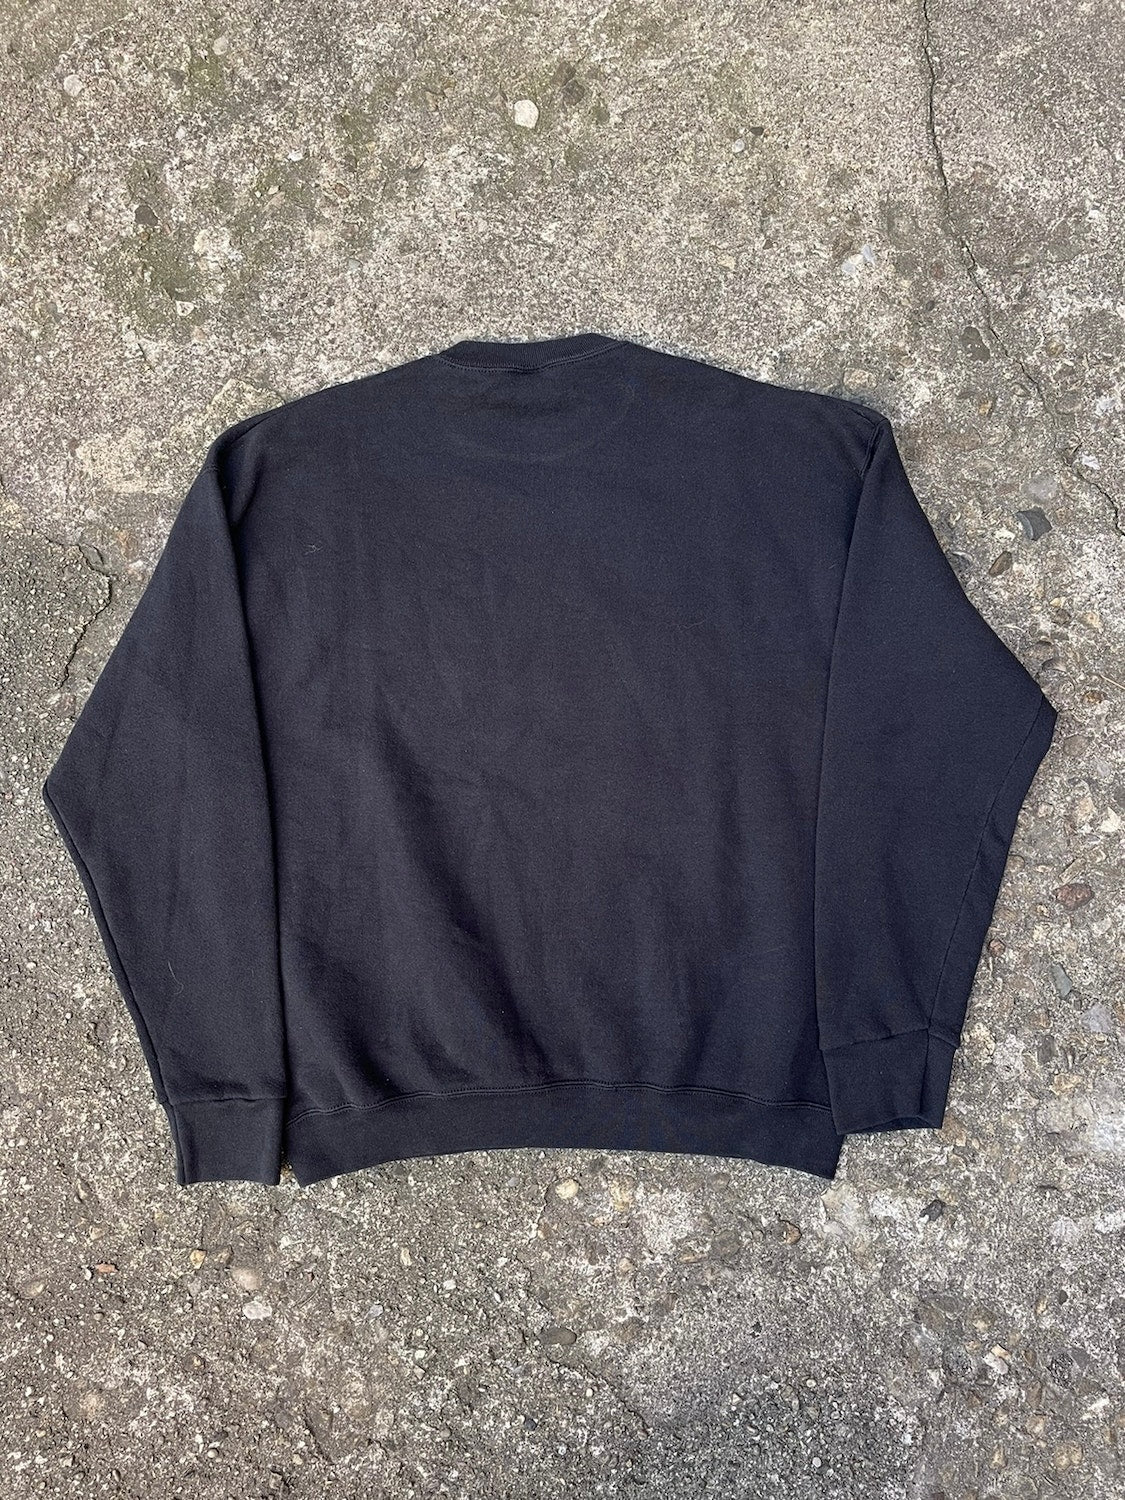 1990’s/2000’s ‘United We Stand’ Crewneck - XL